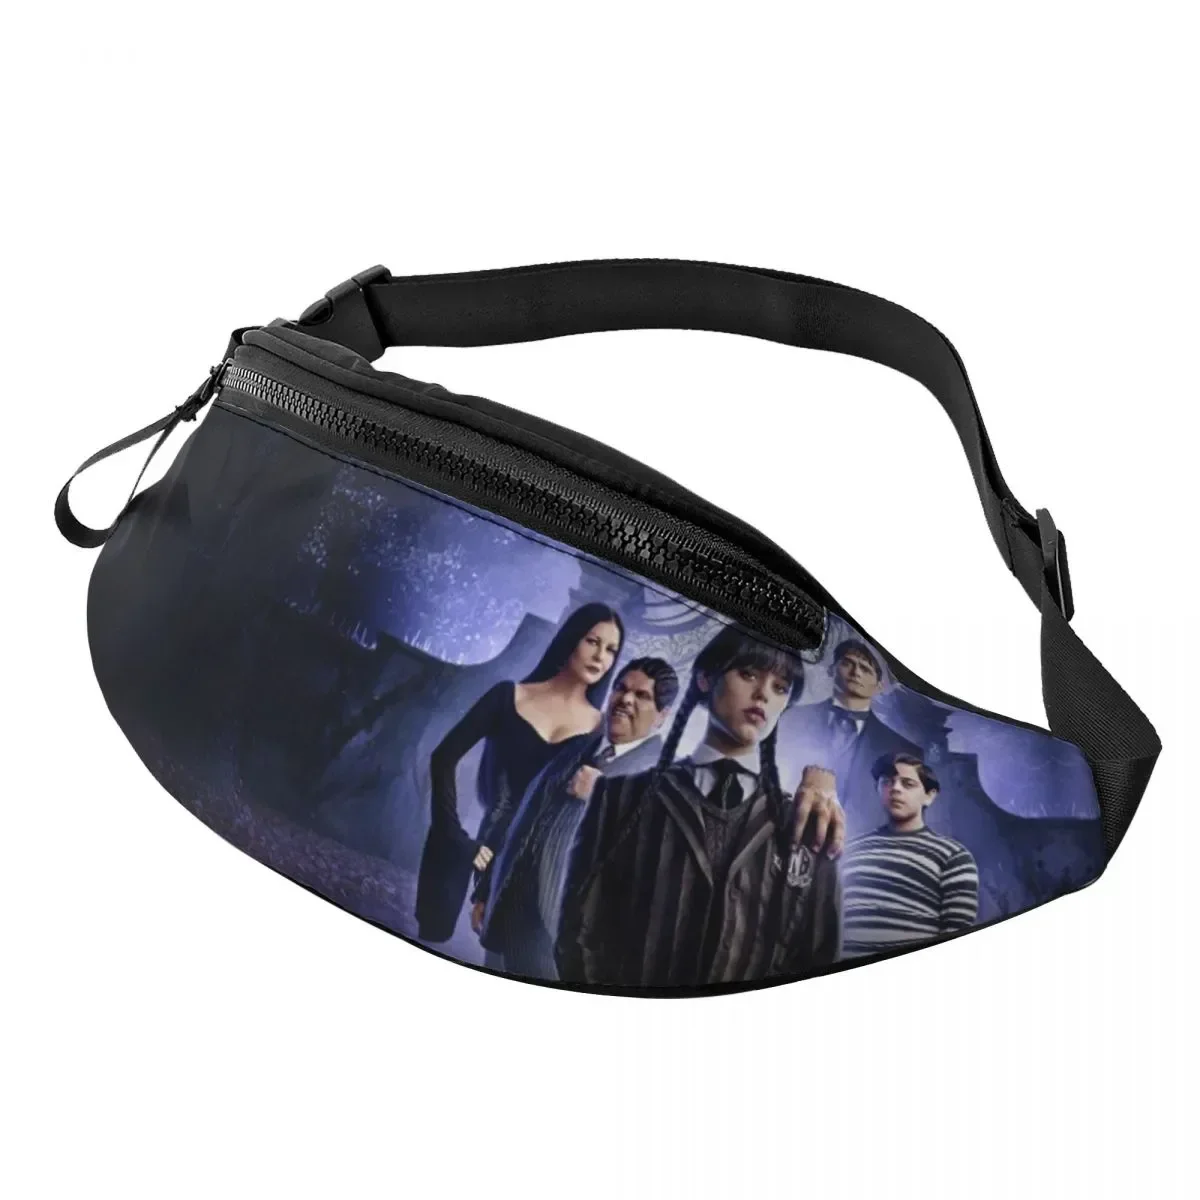 

Wednesday Addams Fanny Pack Women Men Casual Tv Show Crossbody Waist Bag for Traveling Phone Money Pouch